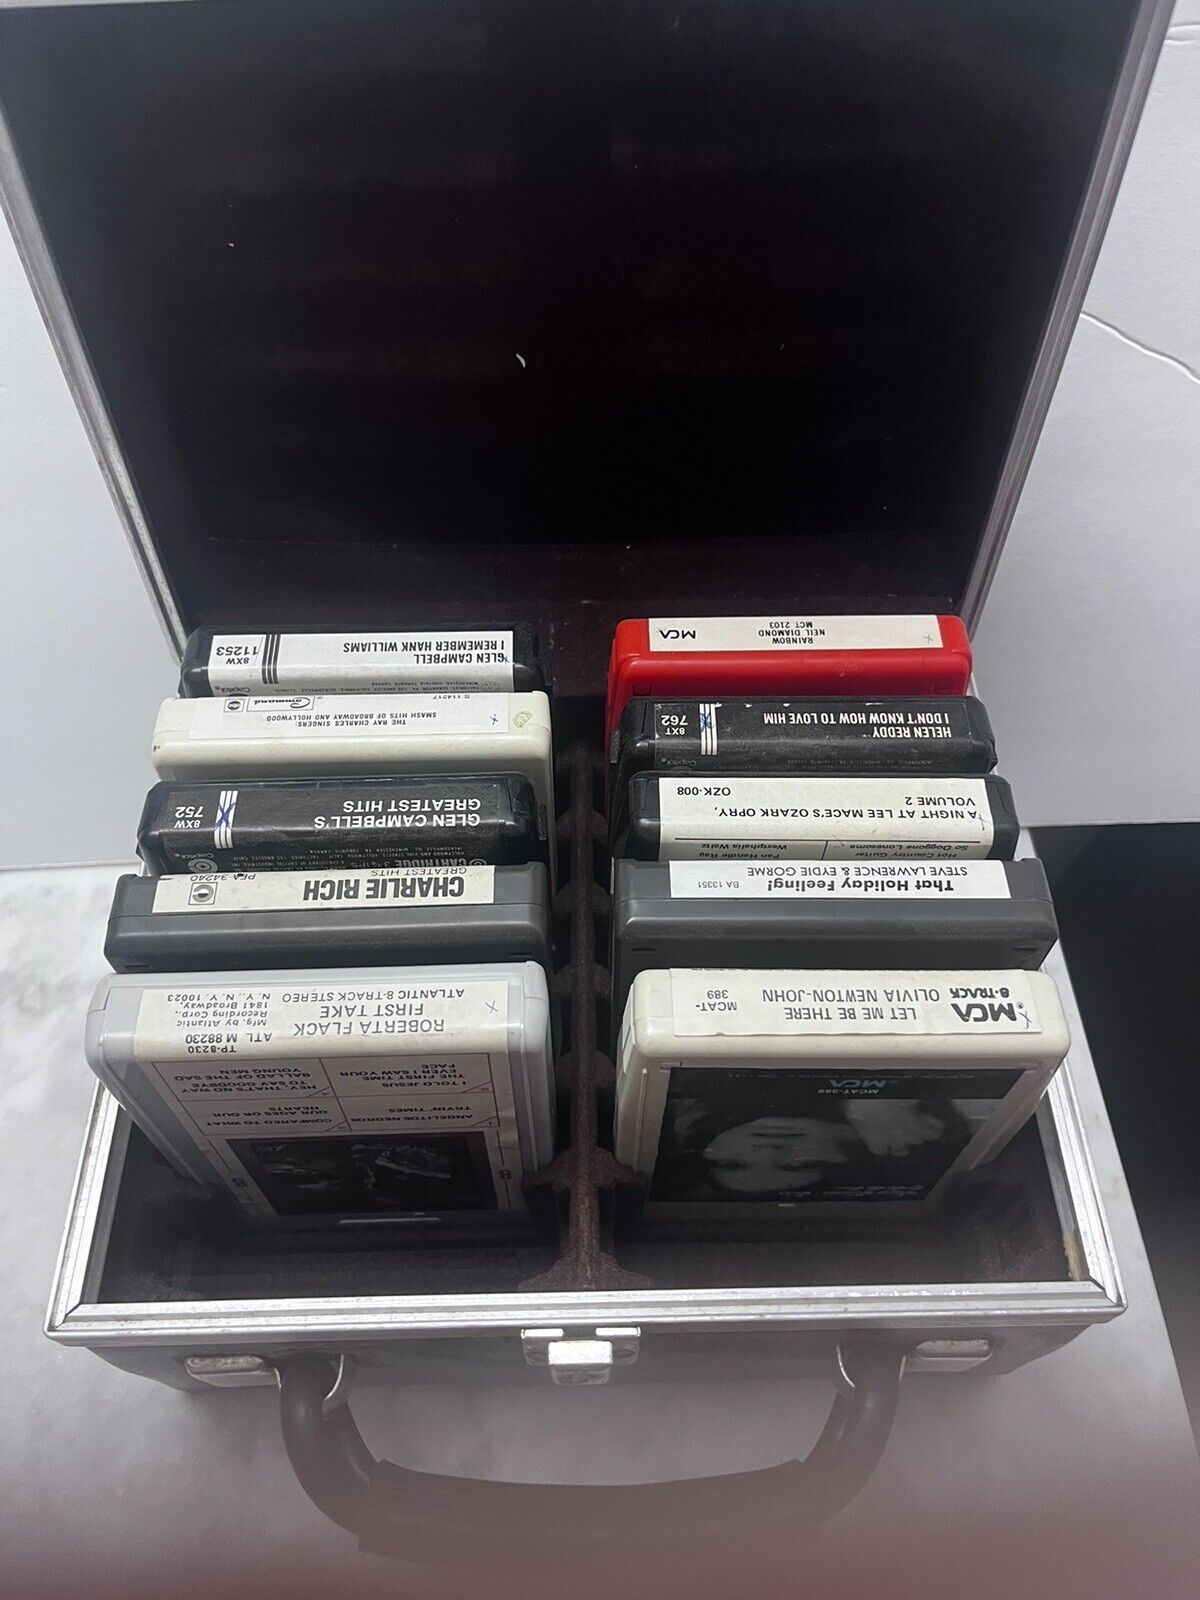 Assortment of Ten 8 Track tapes and case - 1970\'s Vintage Neil Diamond,Charlie